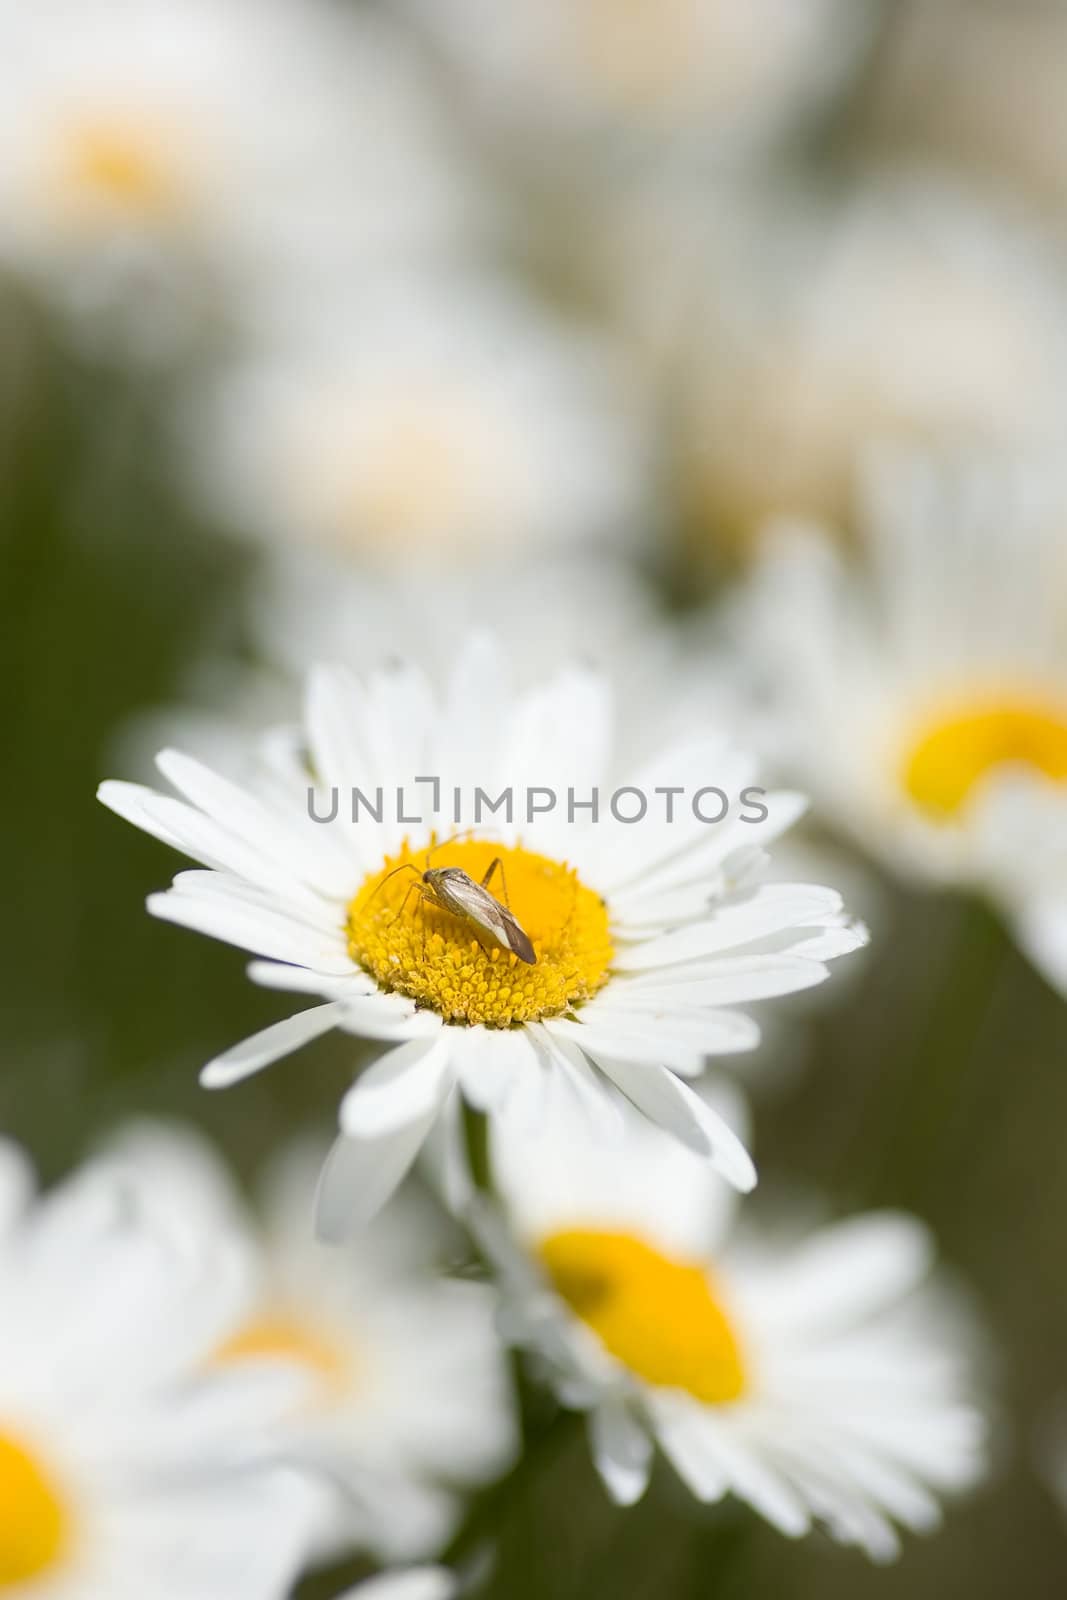 A group of white daisies with a small depth of focus on the center flower that a bug has landed on.